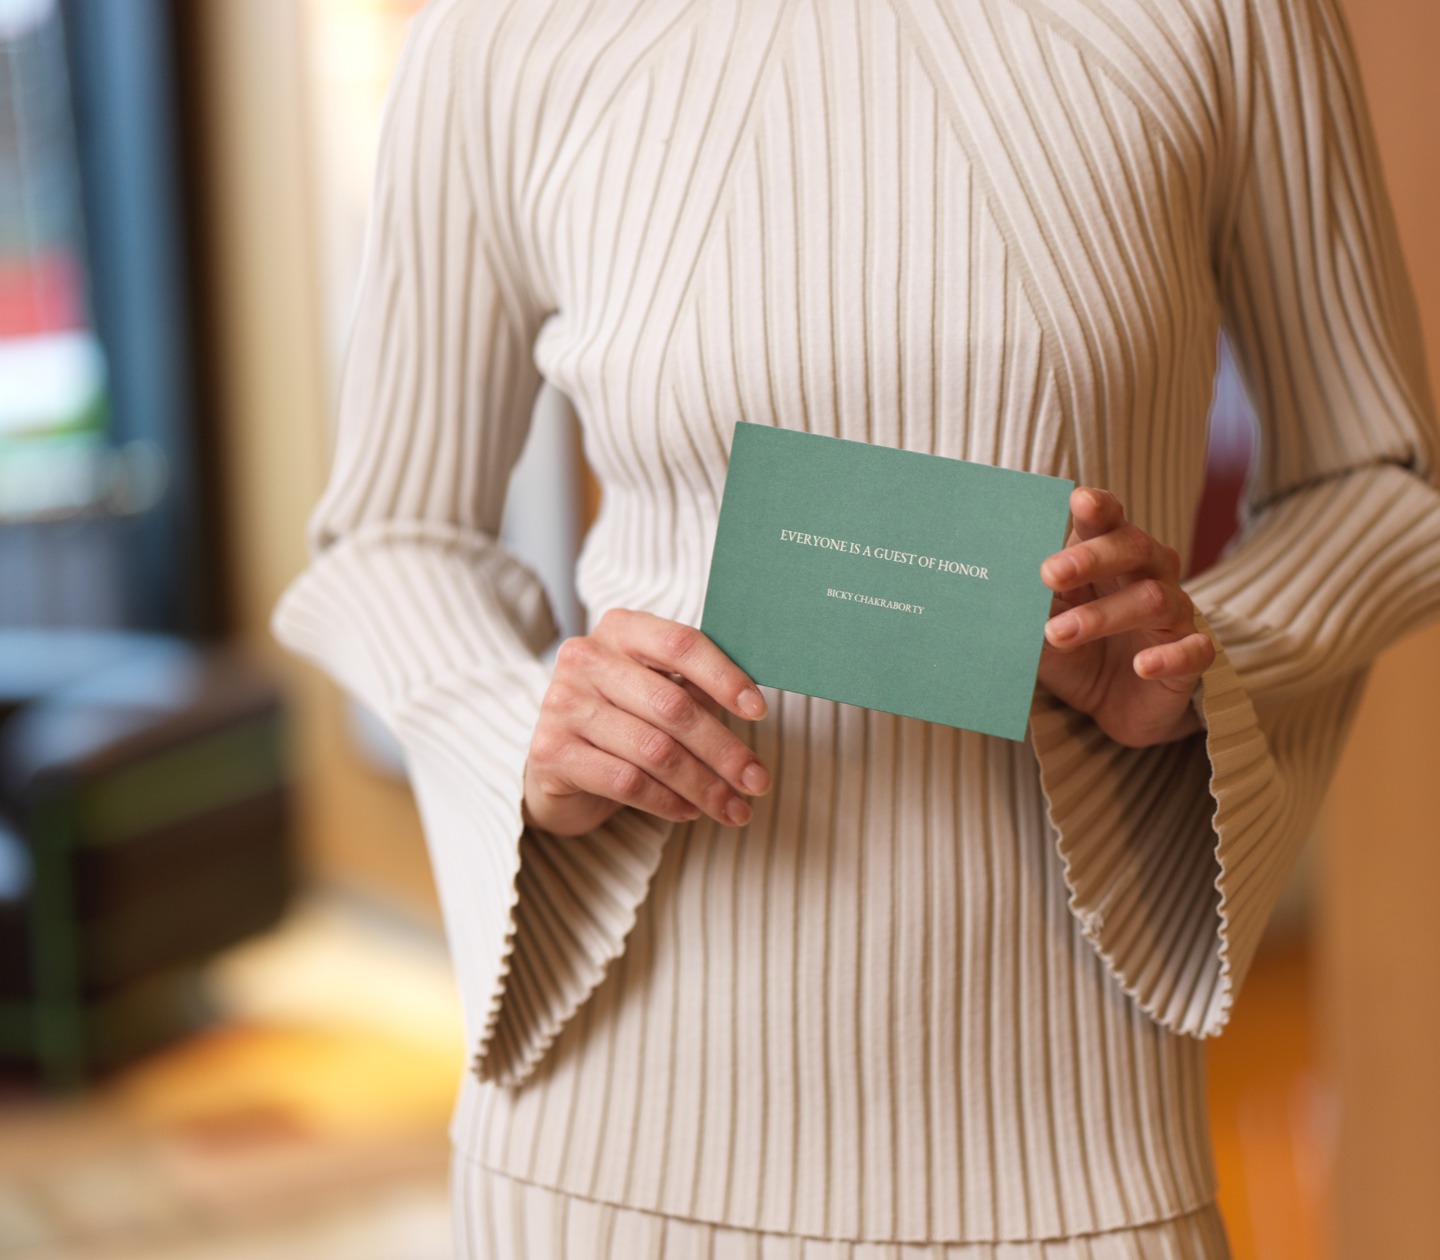 Woman holding green card from Elite Hotels